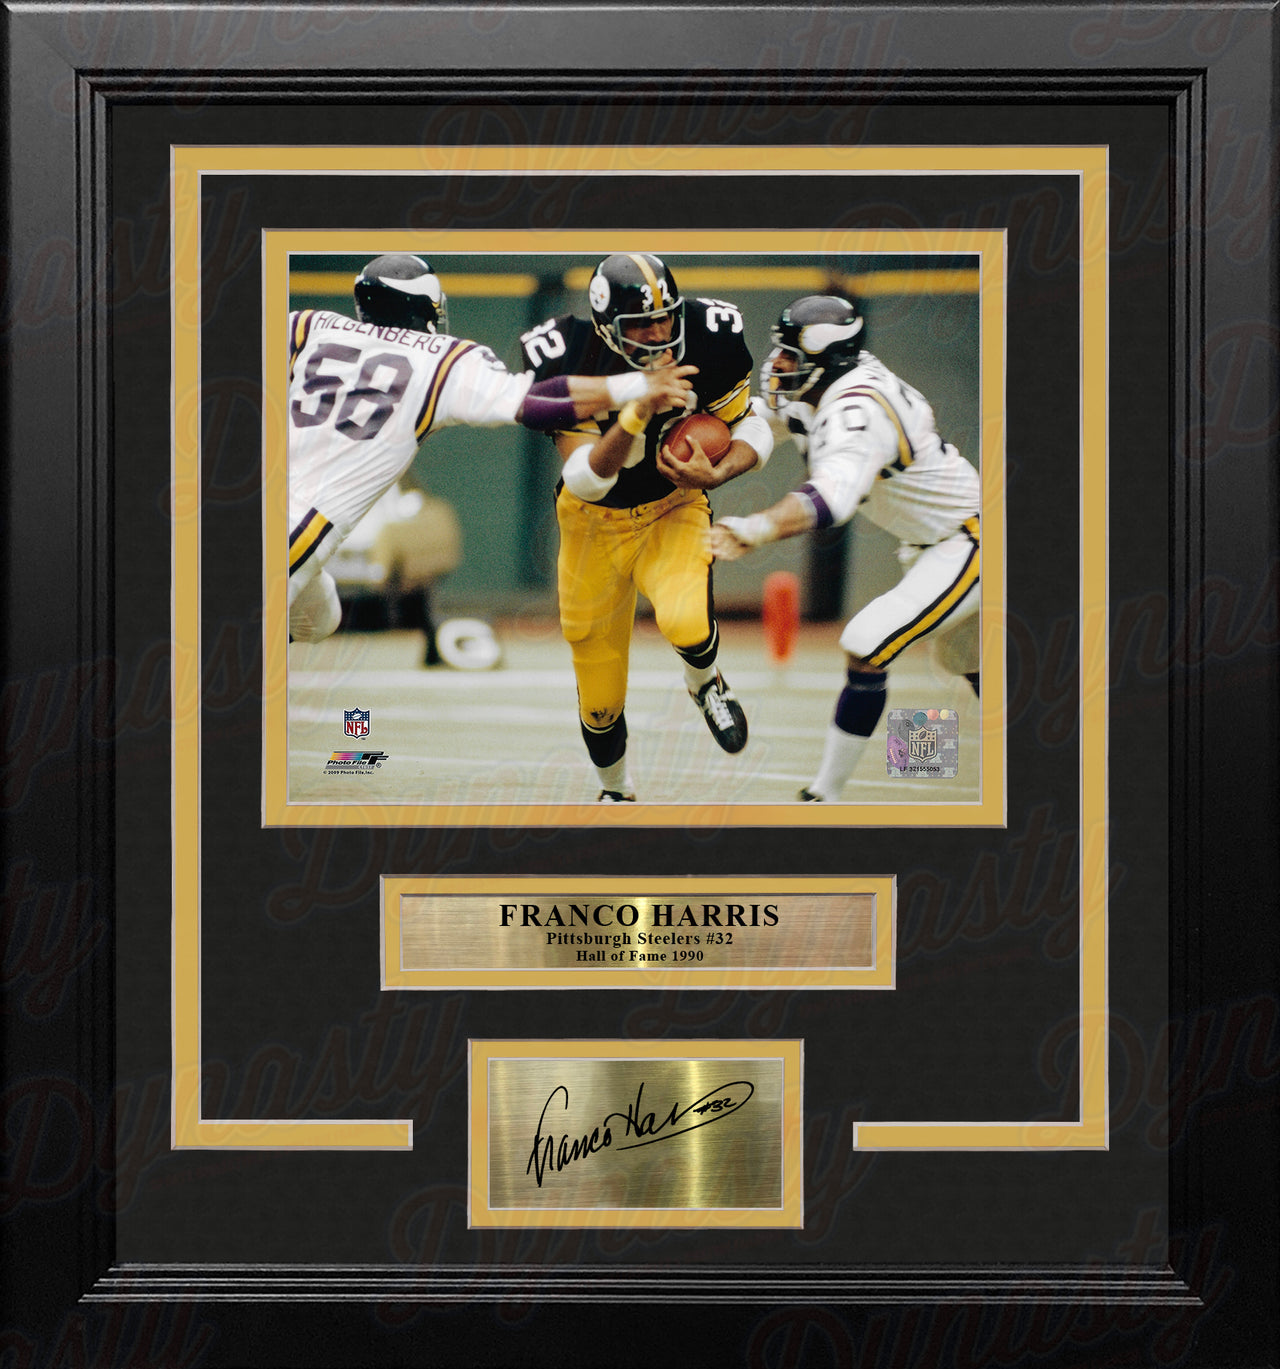 Franco Harris v. Vikings Pittsburgh Steelers 8" x 10" Framed Photo with Engraved Autograph - Dynasty Sports & Framing 